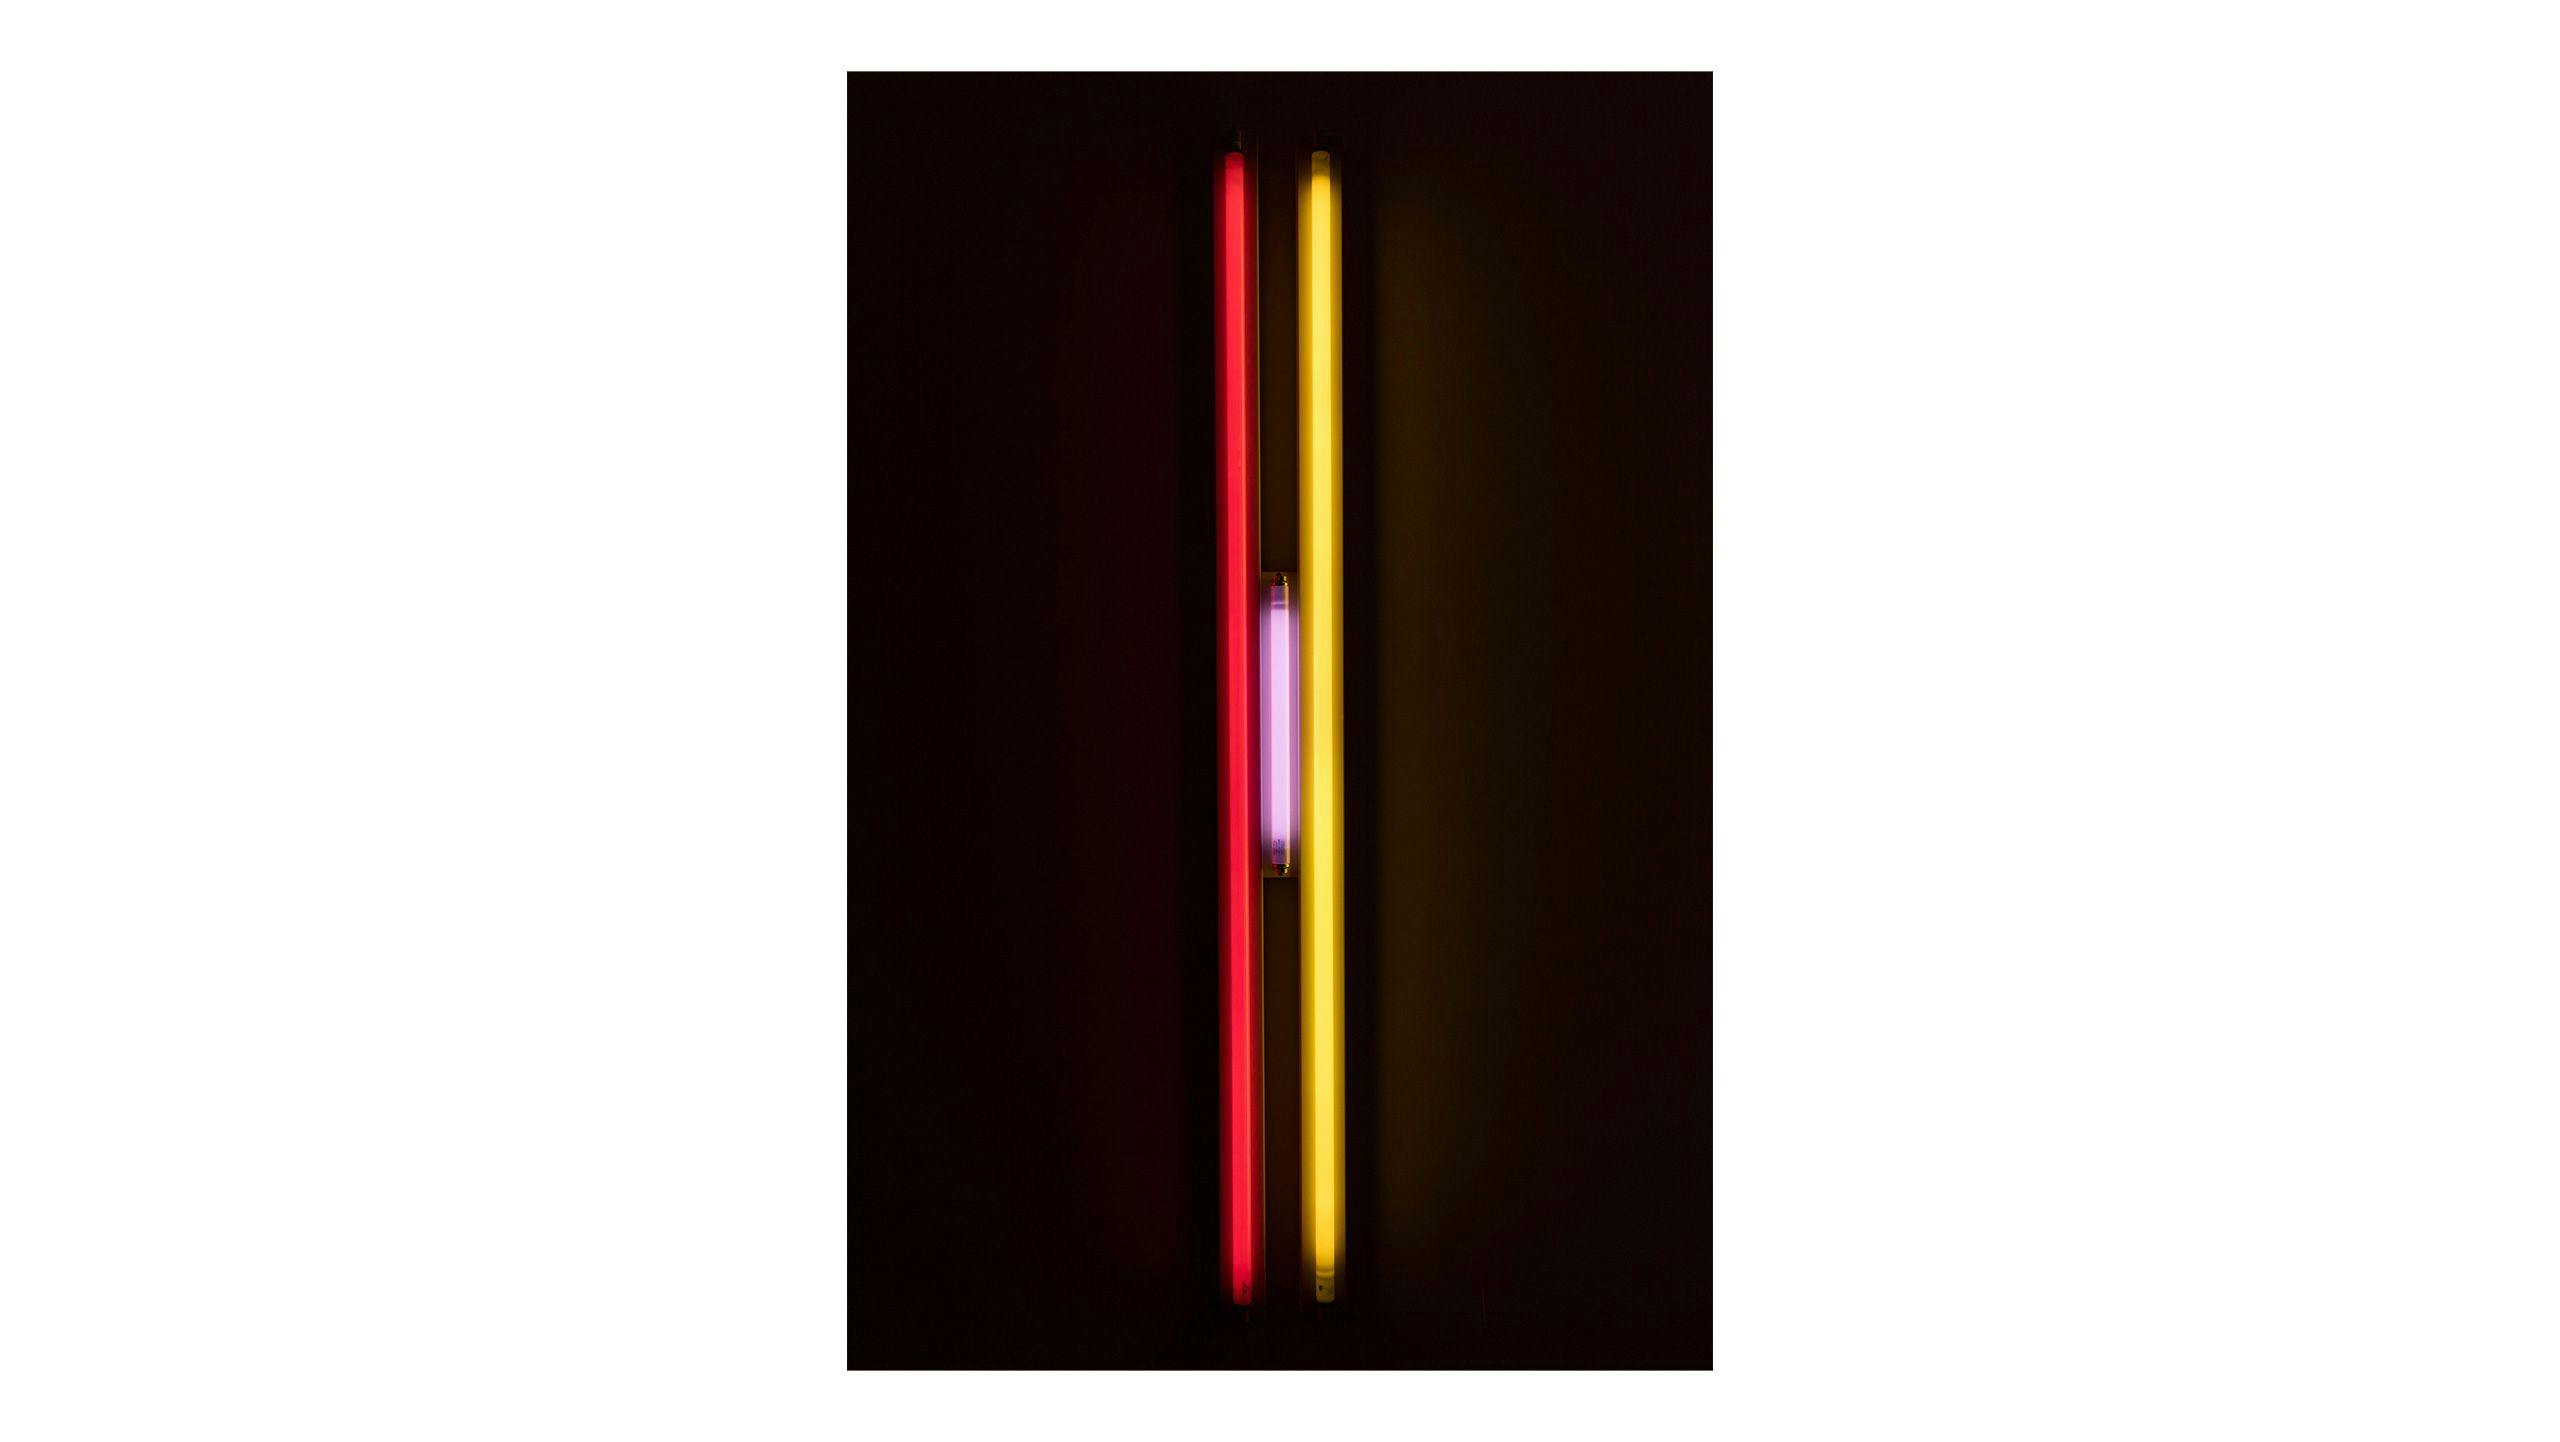 Dan Flavin, Puerto Rican Light (to Jeanie Blake) 2, 1965. Collection of Institute of Contemporary Art, Miami. Gift of Joan and Roger Sonnabend. Photo: Silvia Ros.